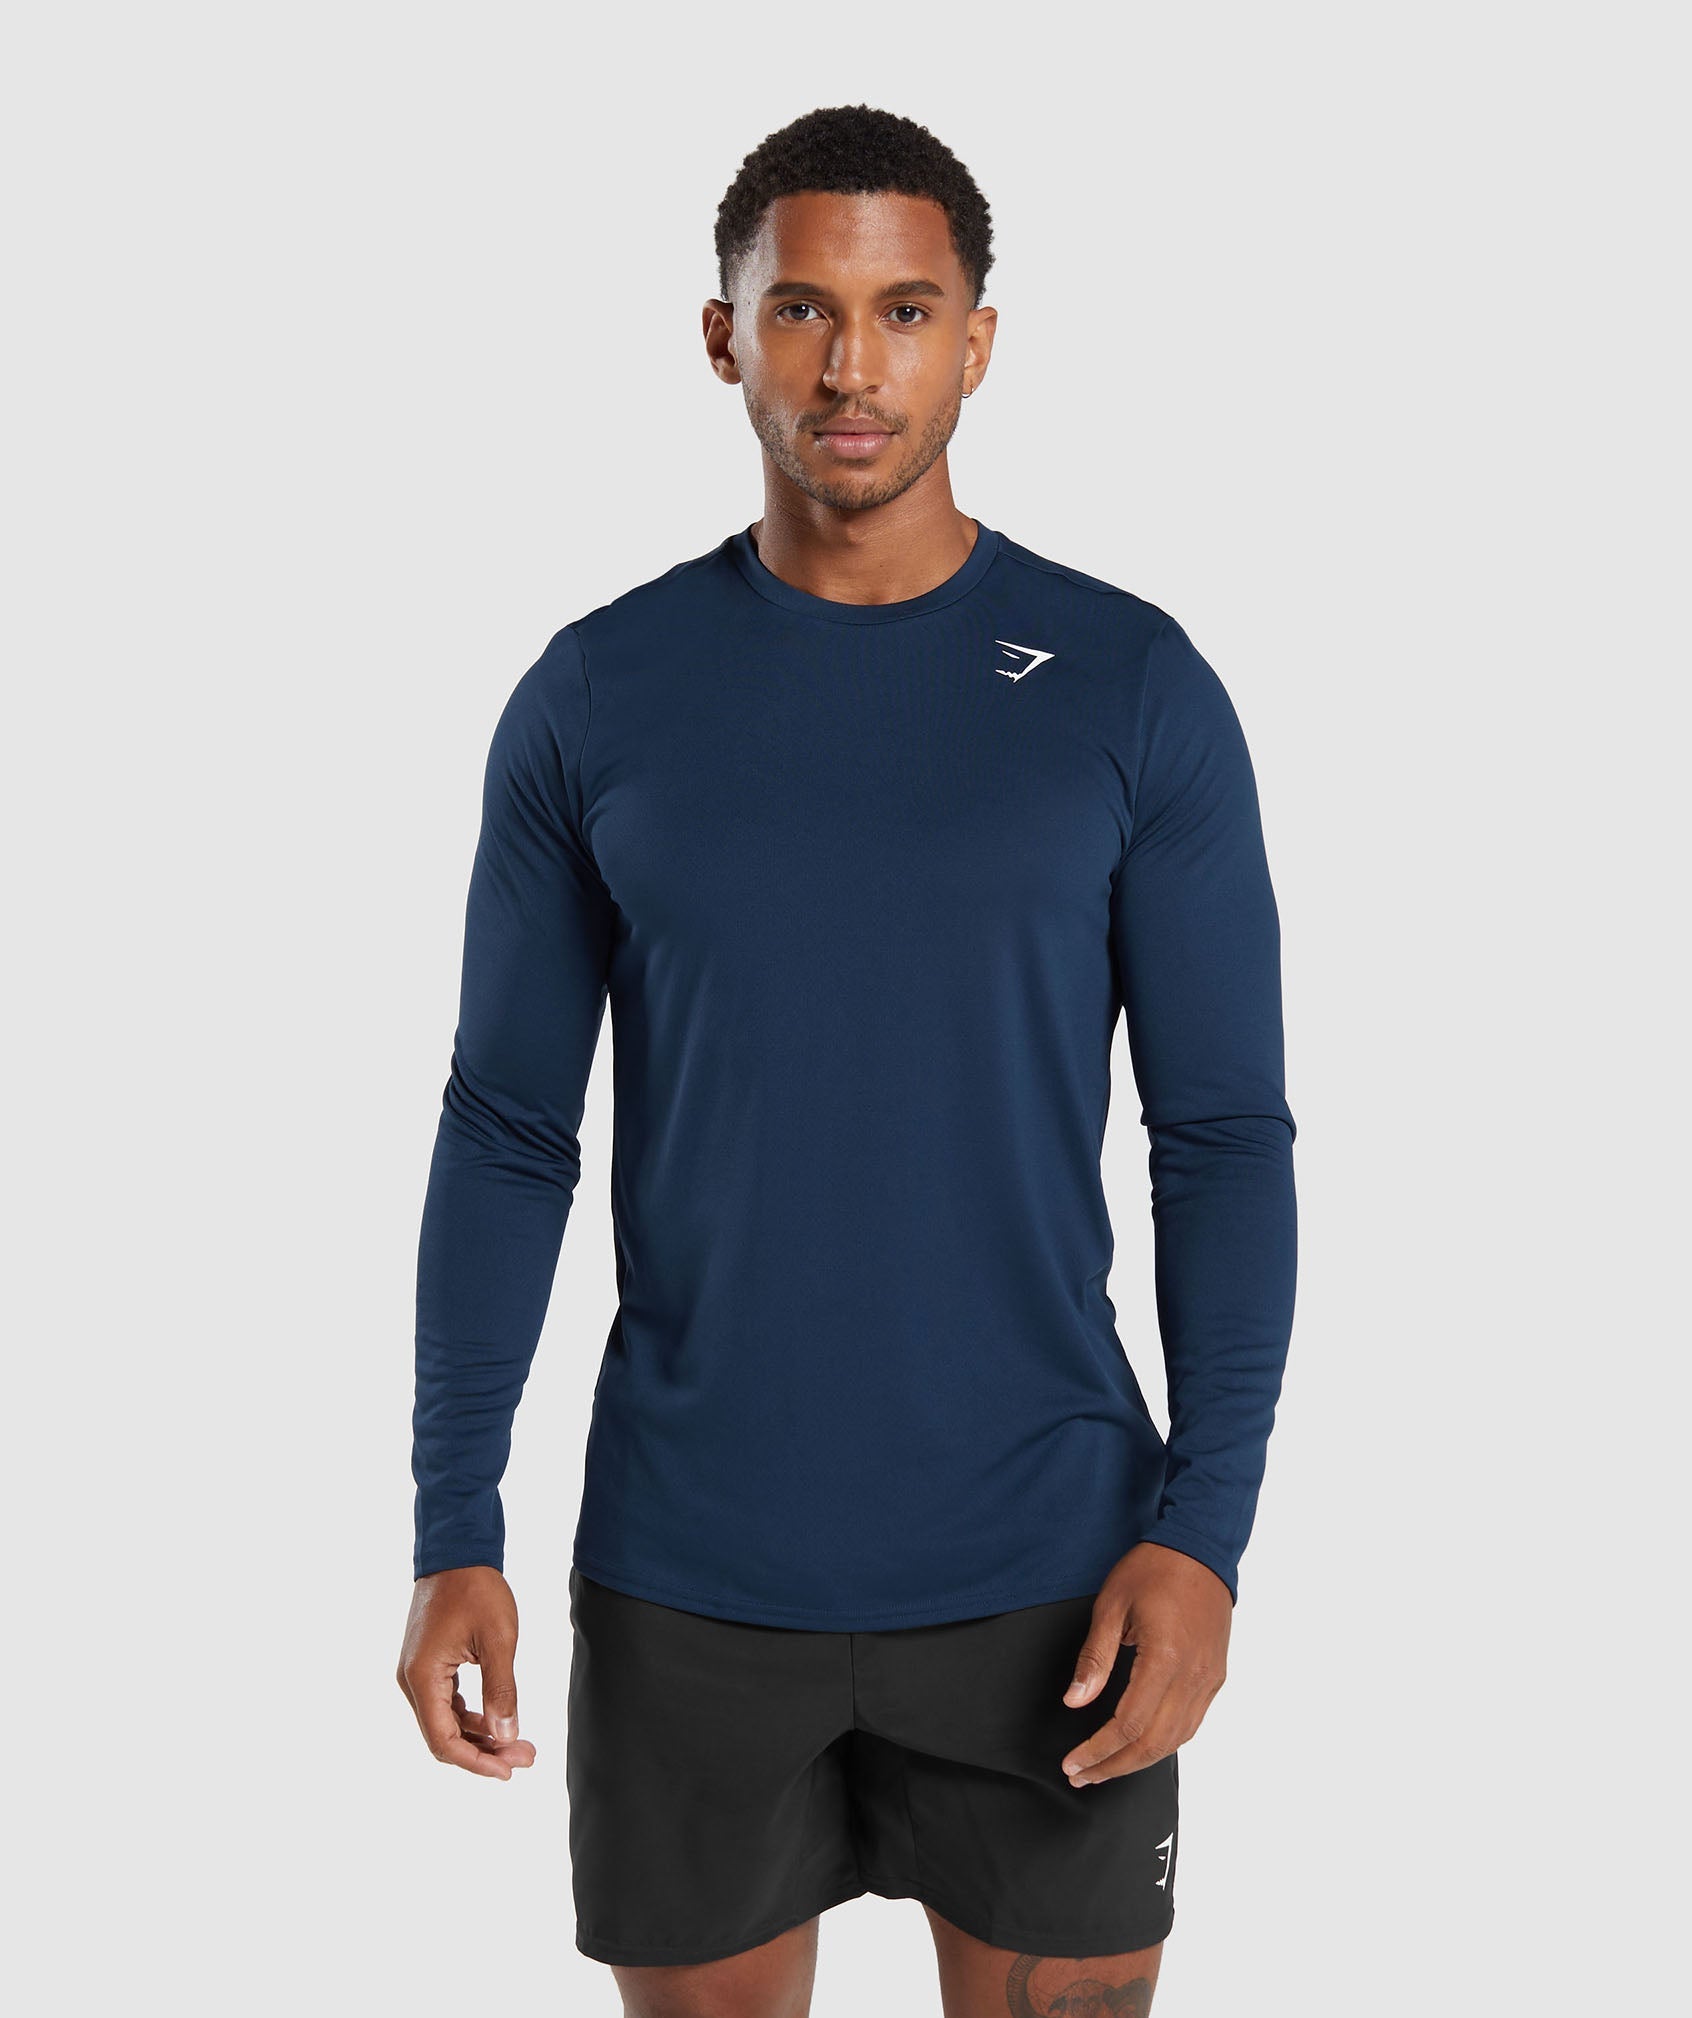 Arrival Long Sleeve T-Shirt in Navy is out of stock